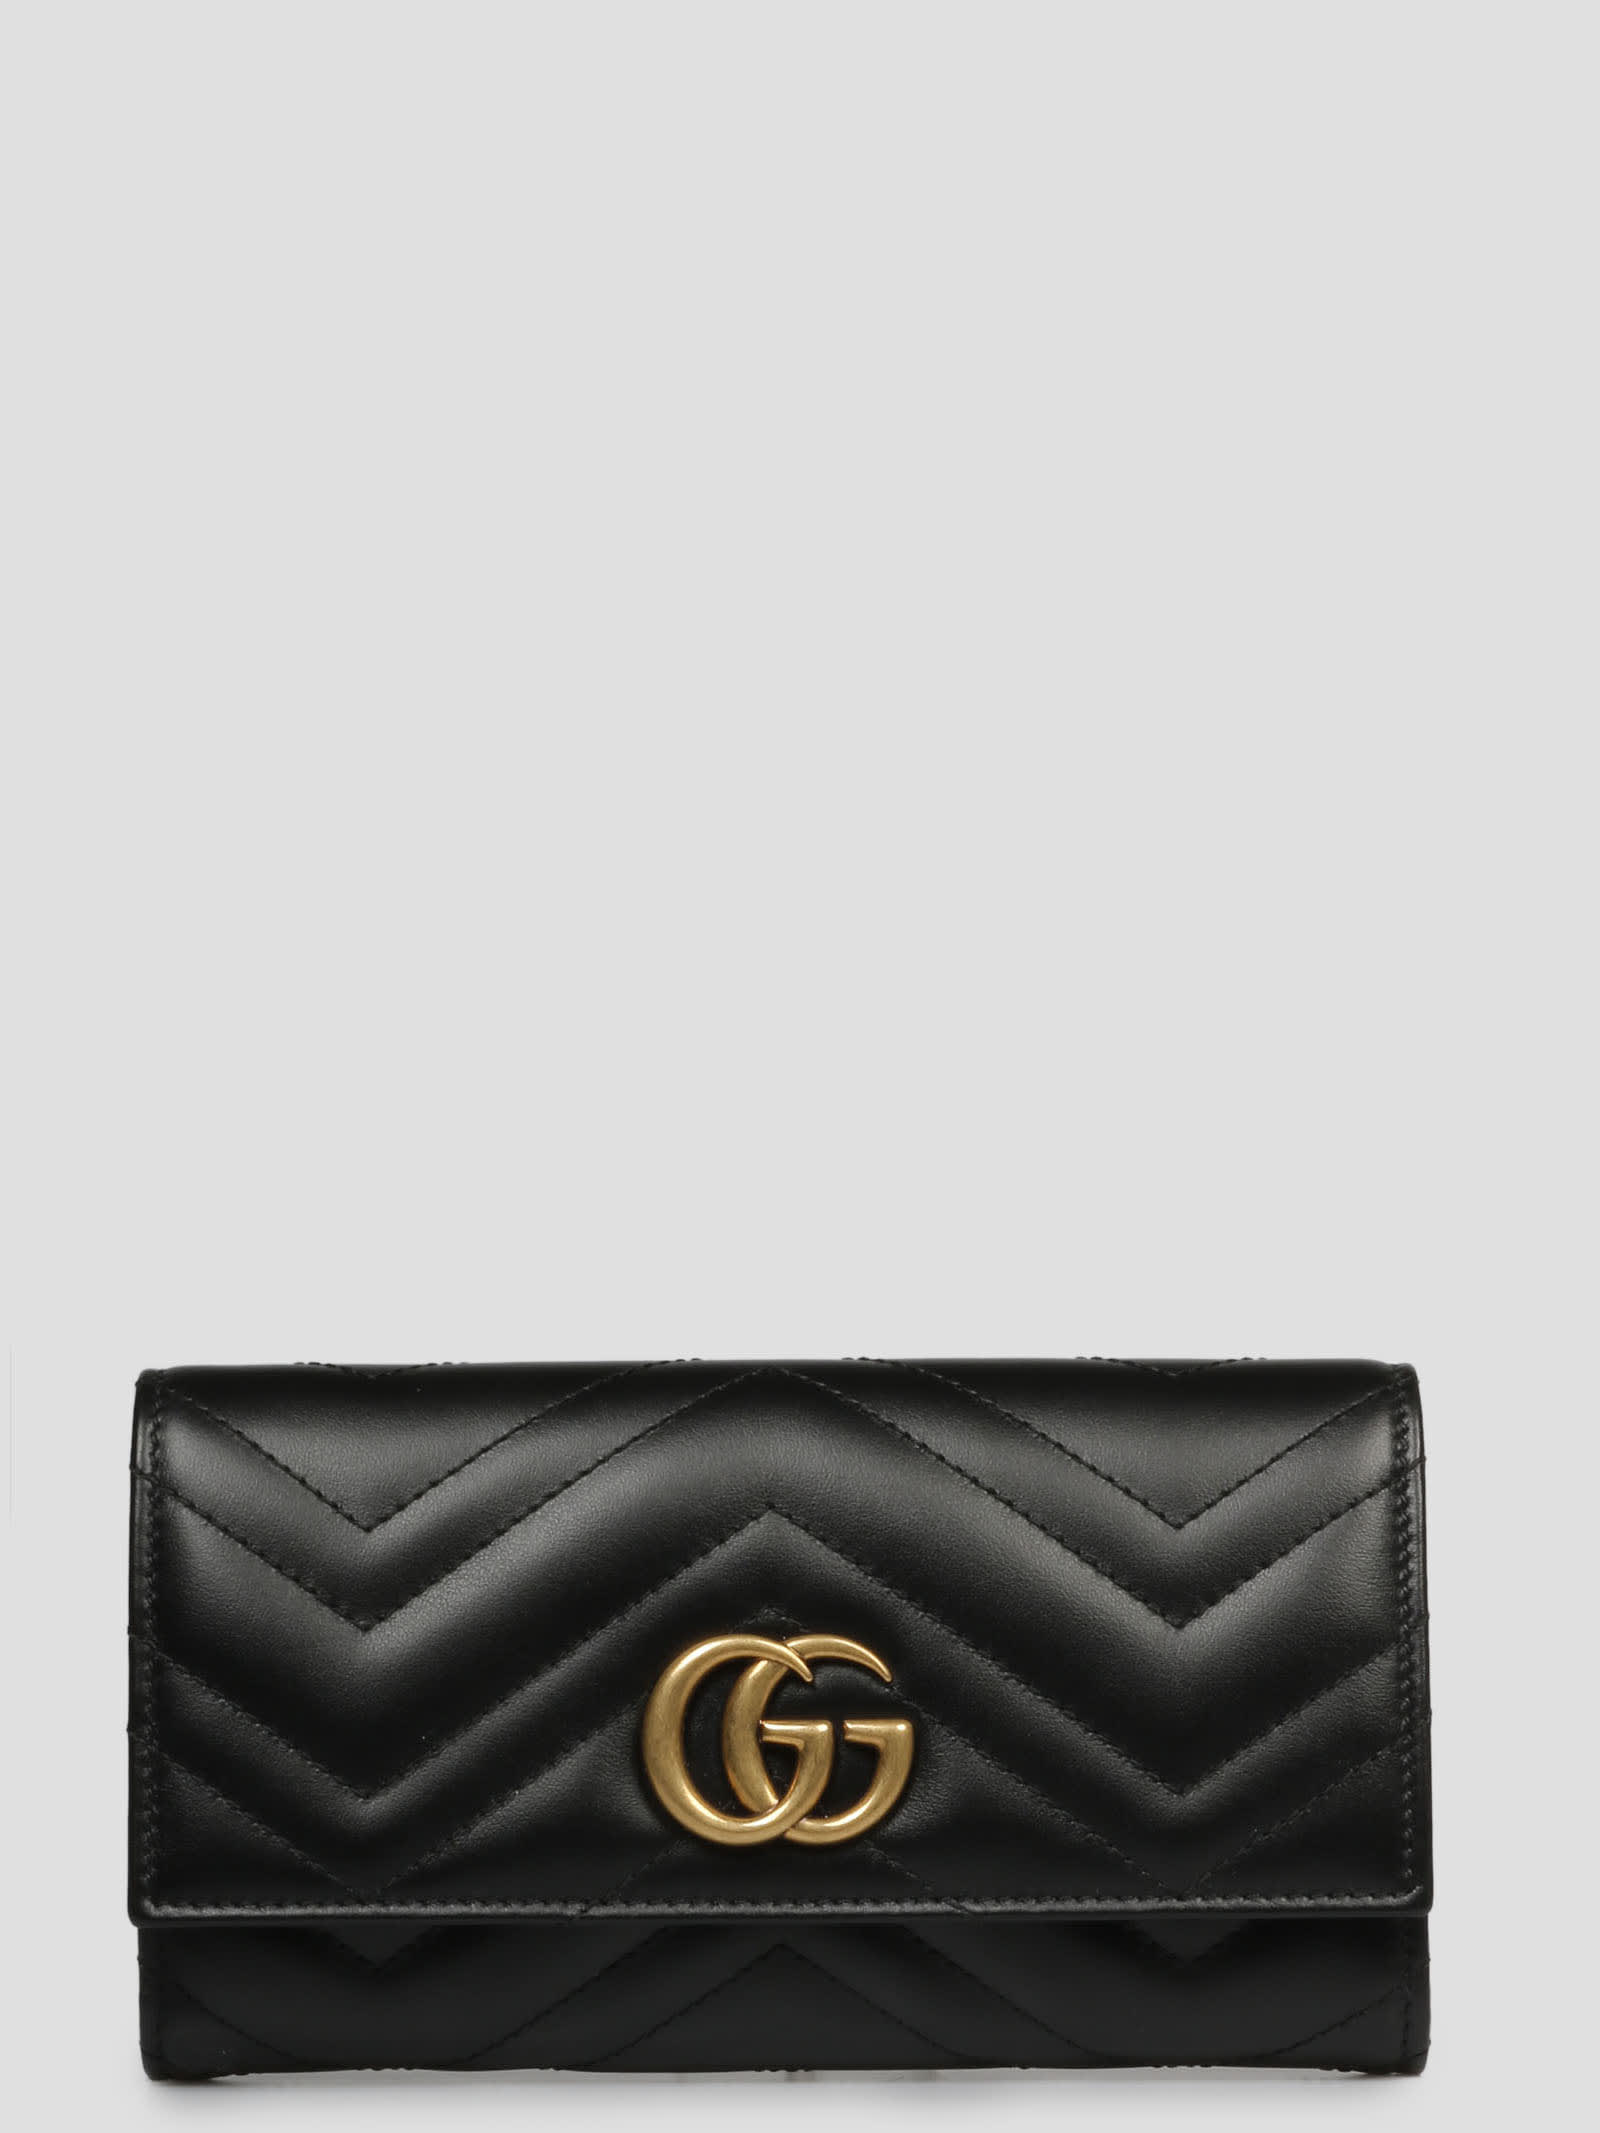 Black Marmont Gg Continental Wallet